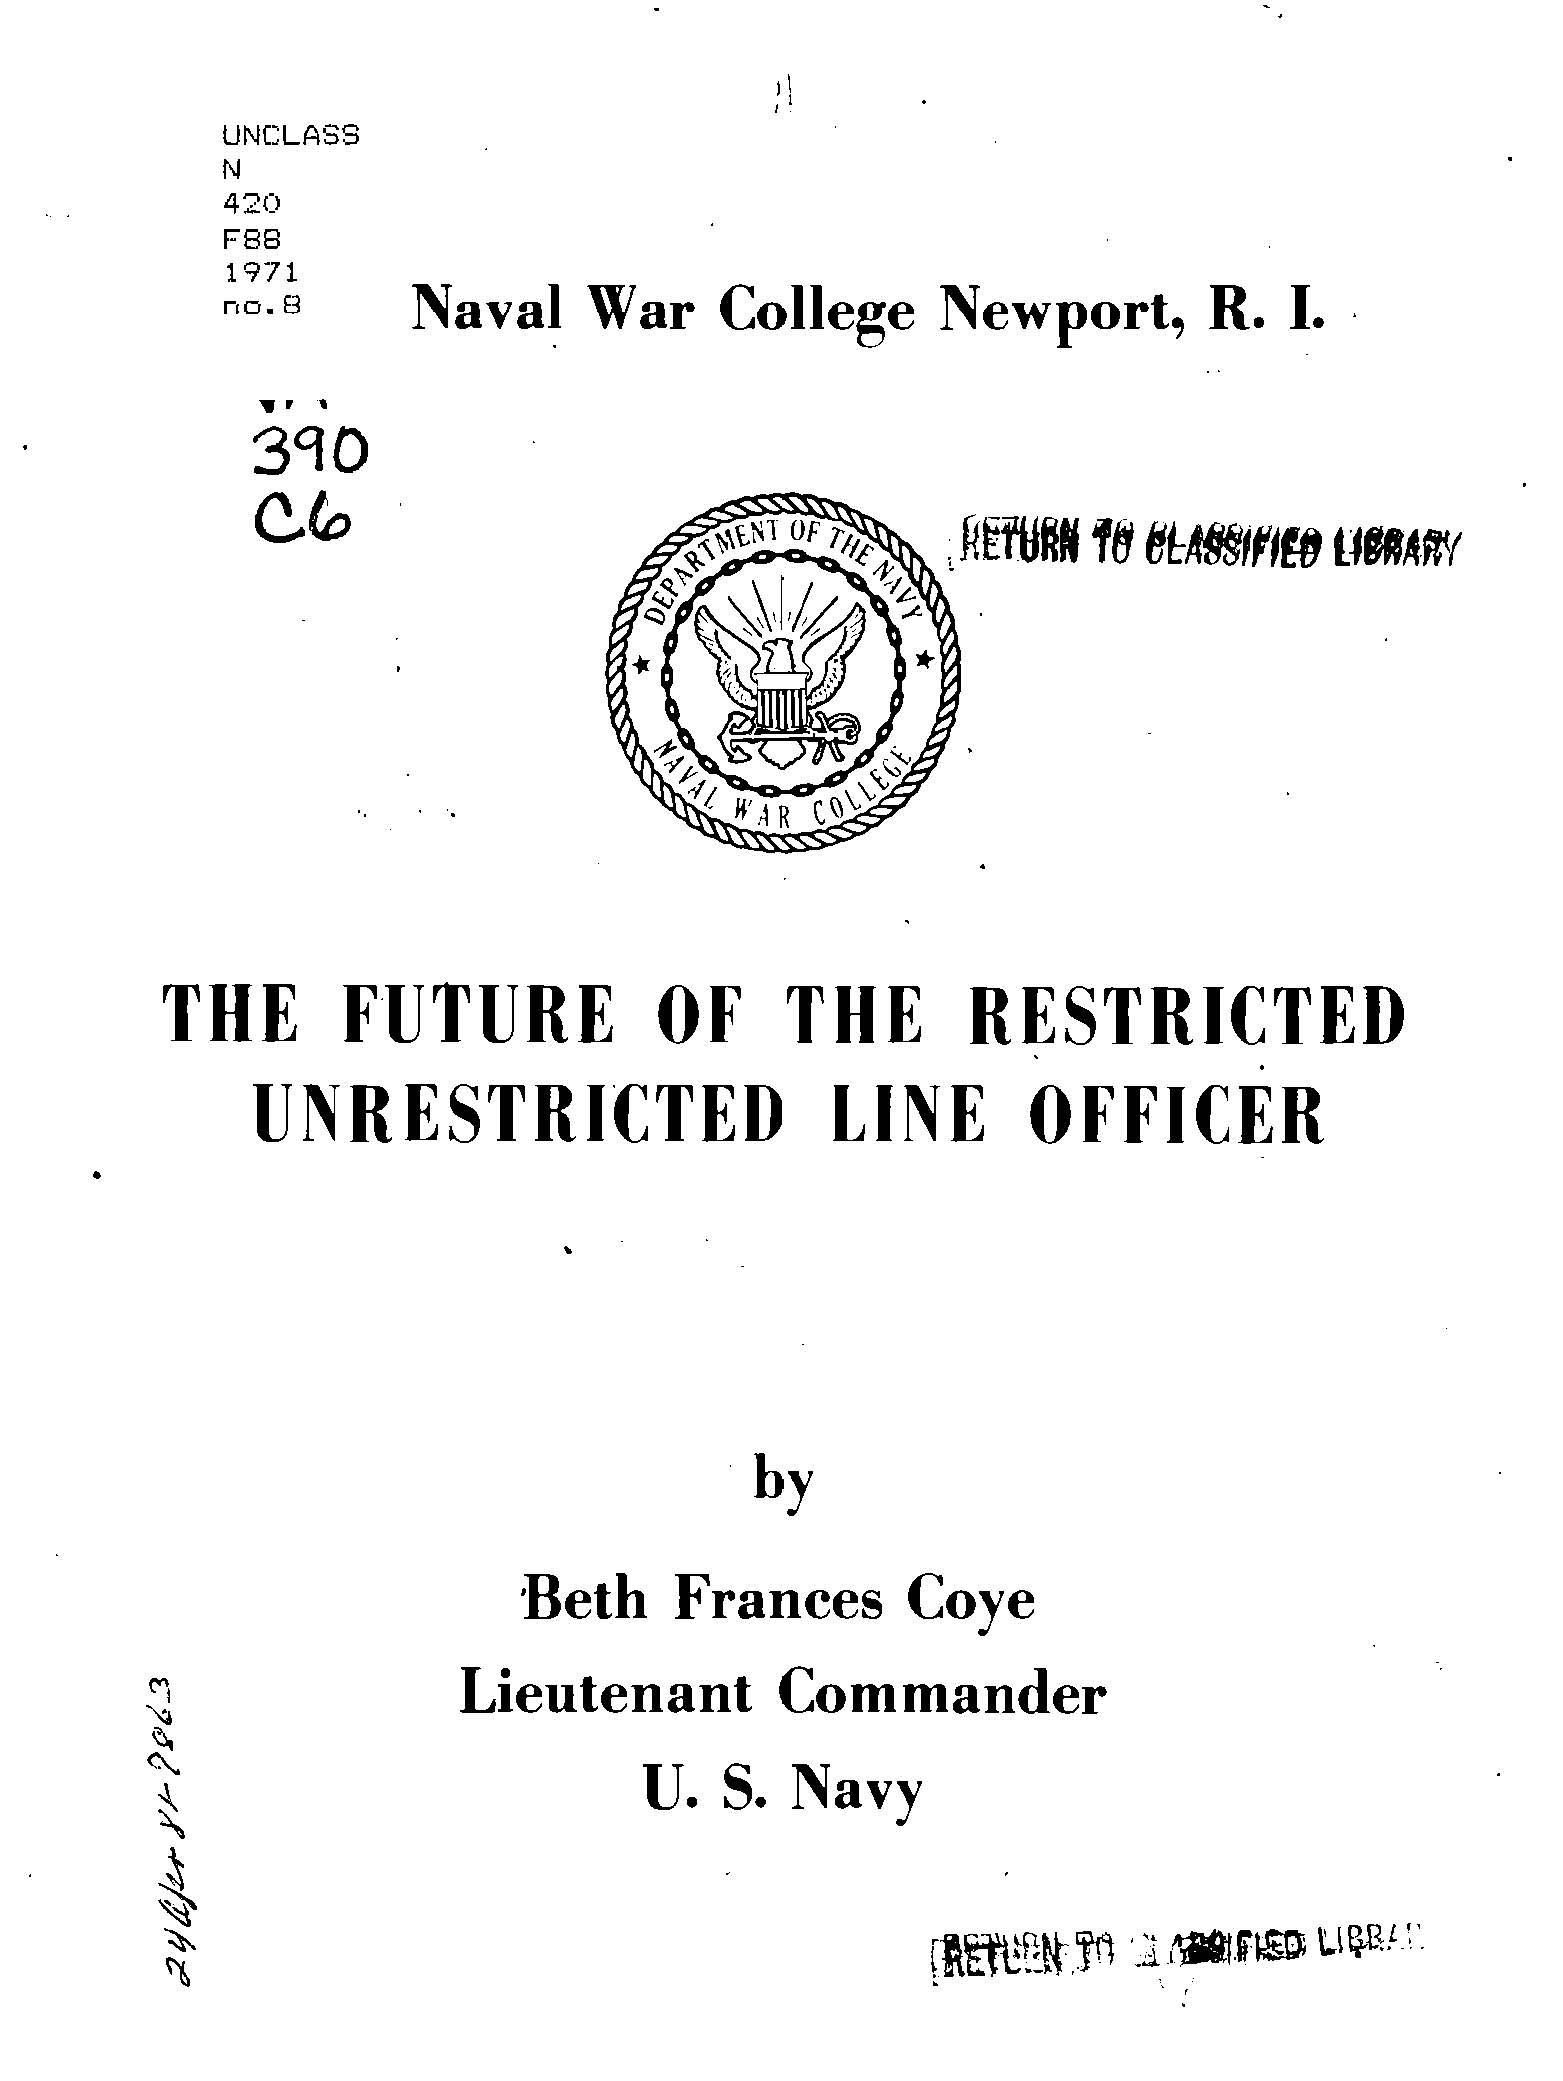 Examination of U.S. Navy policy options towards women line officers, in light of the status of American women or the future of the restricted unrestricted line officer, by Beth F. Coye